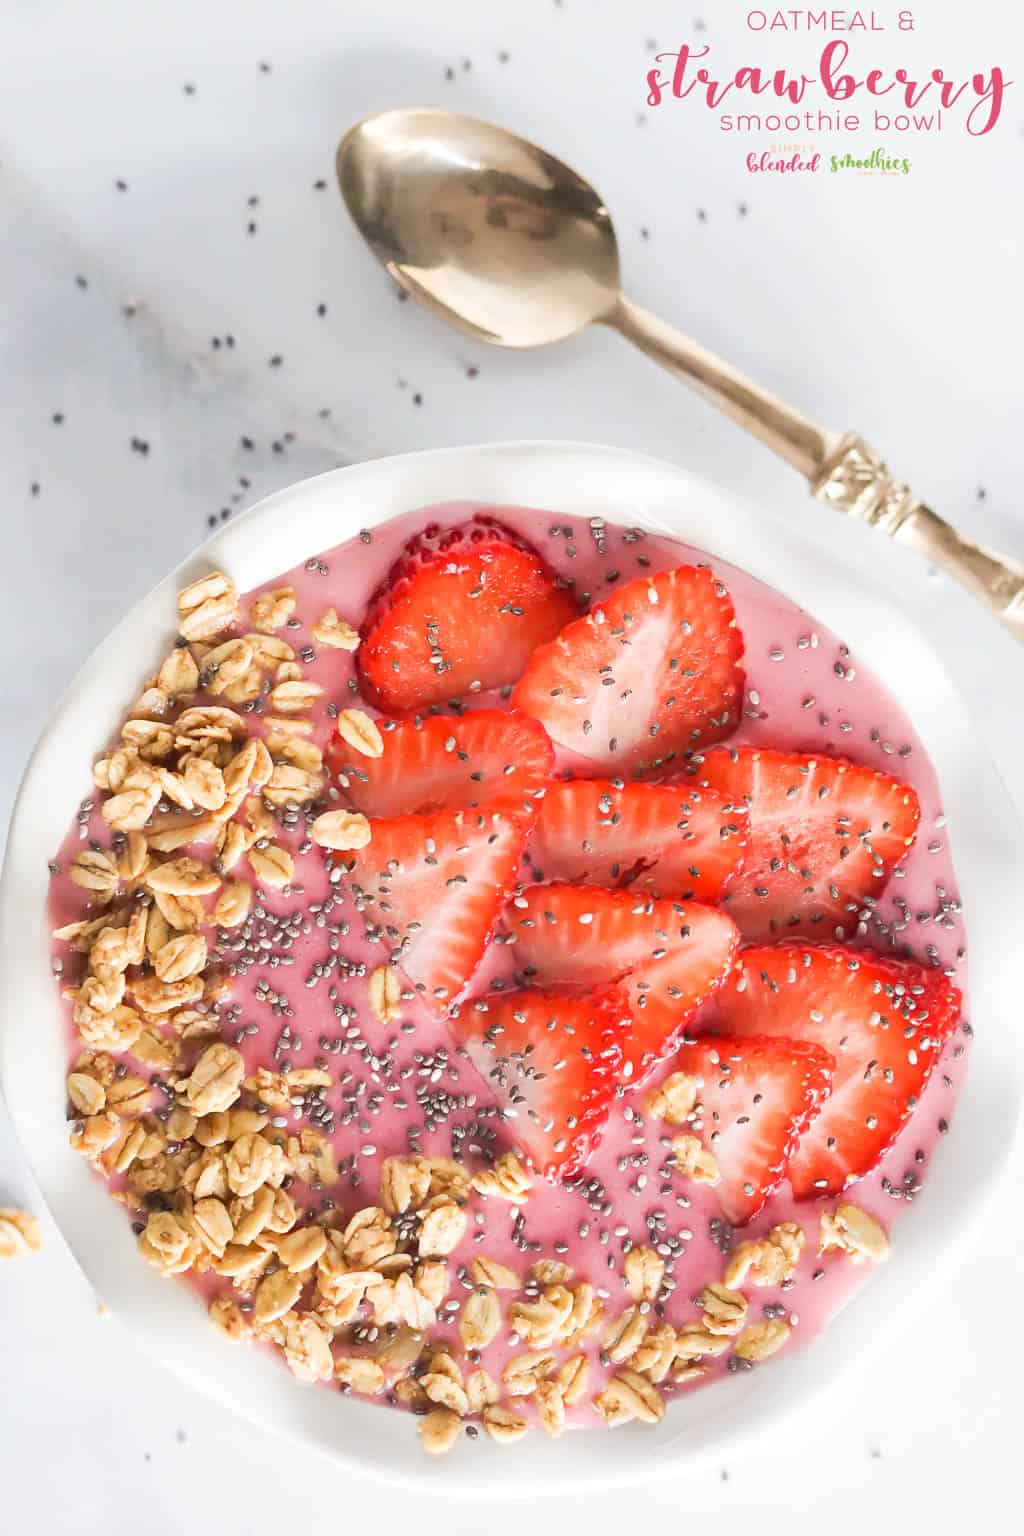 Strawberry Oatmeal Smoothie Bowl | Simply Blended Smoothies